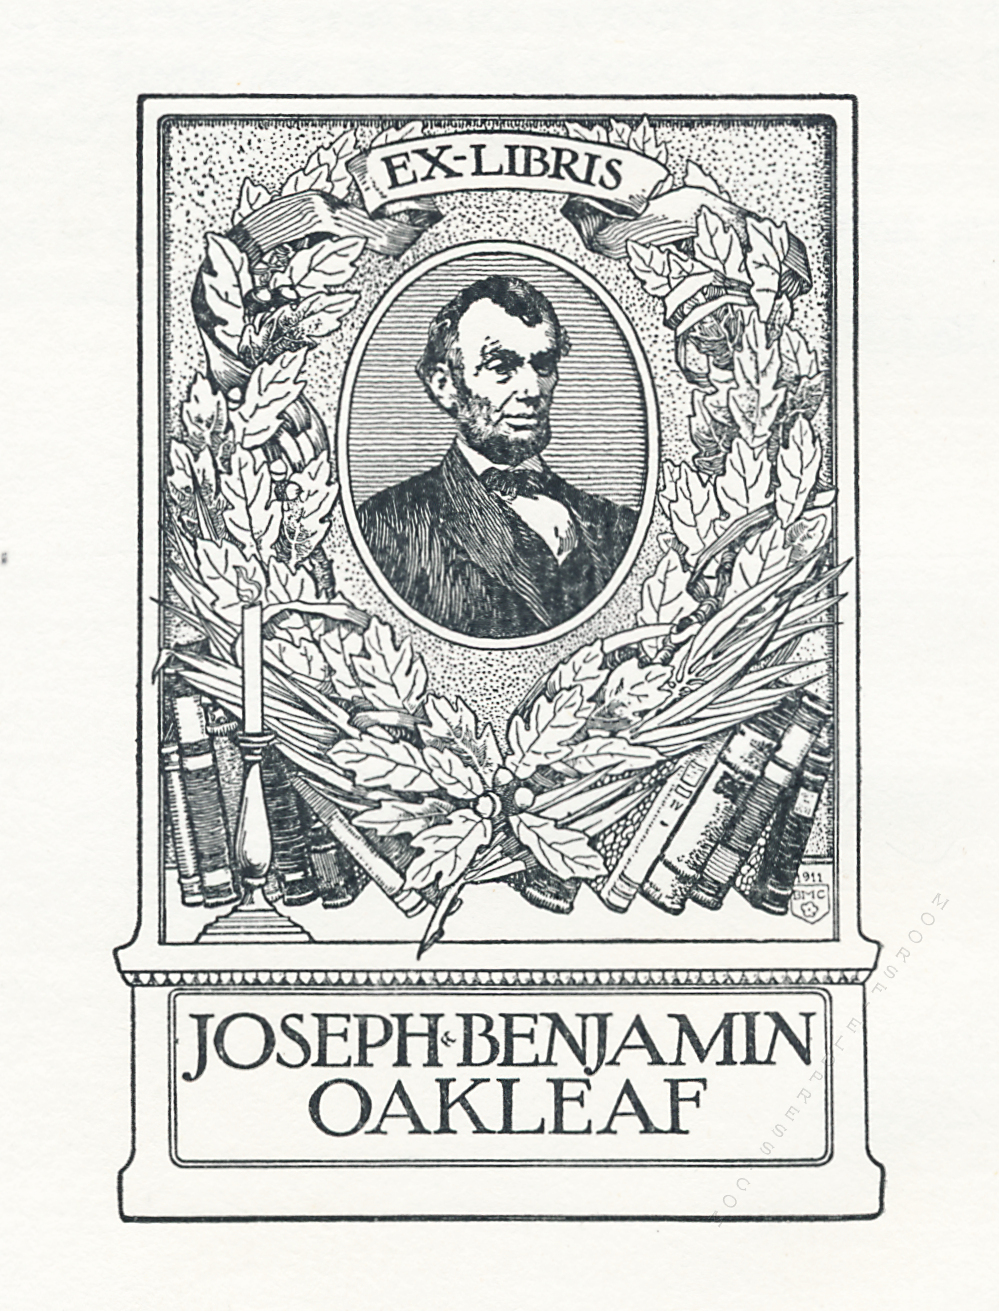 book plate for joseph oakleaf in the book Lincolniana
            by H. A. Fowler 1913